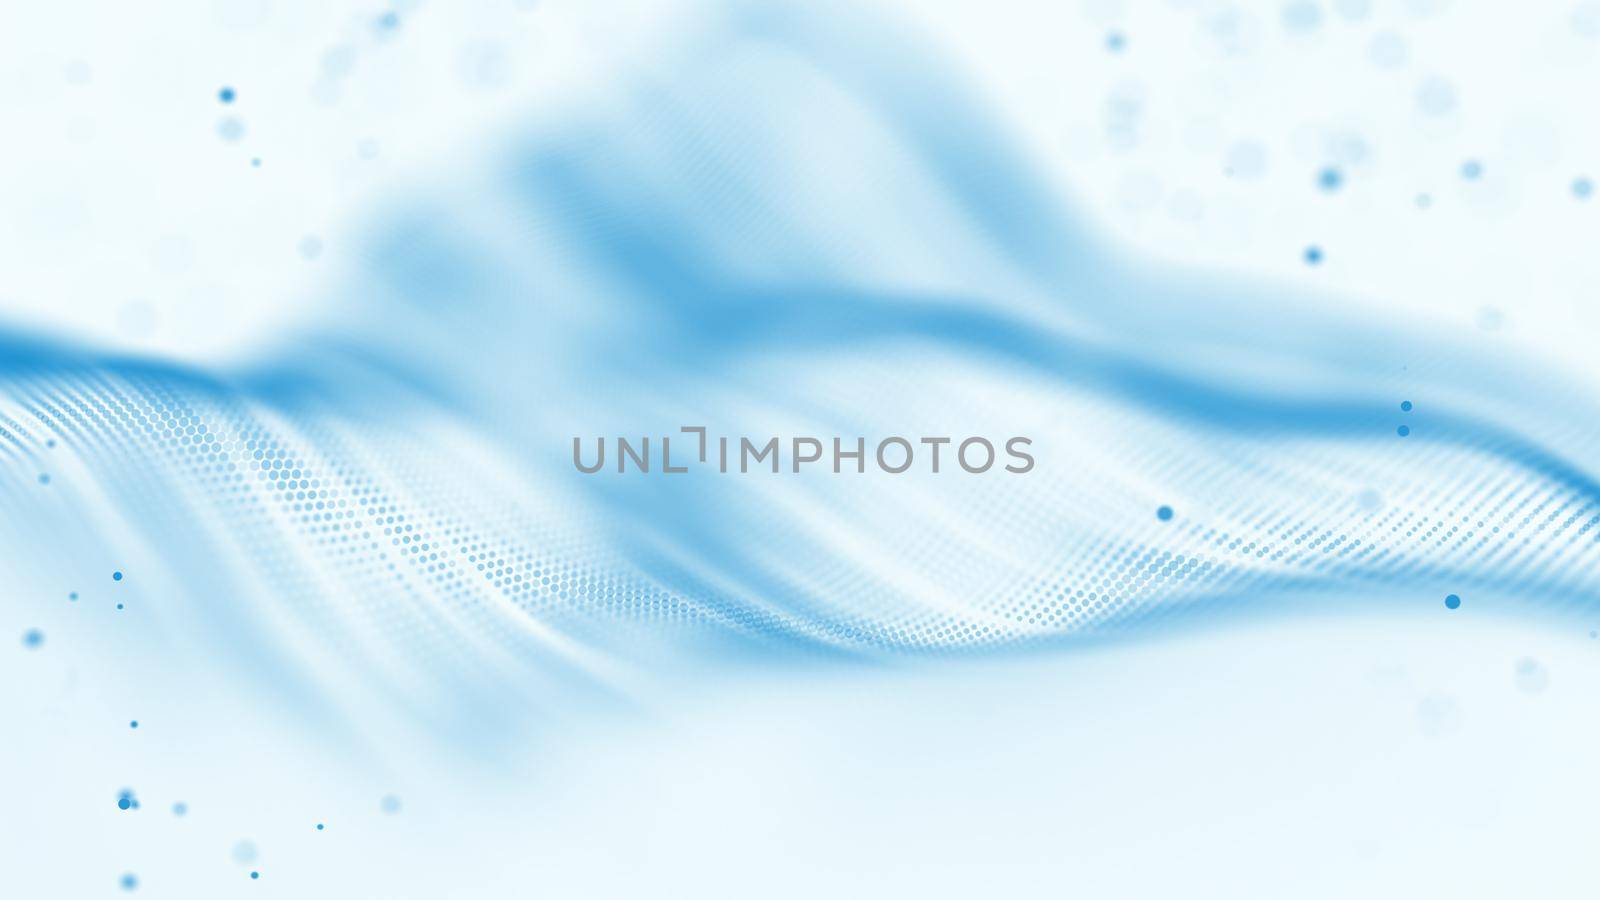 Blue abstract wave on white background.